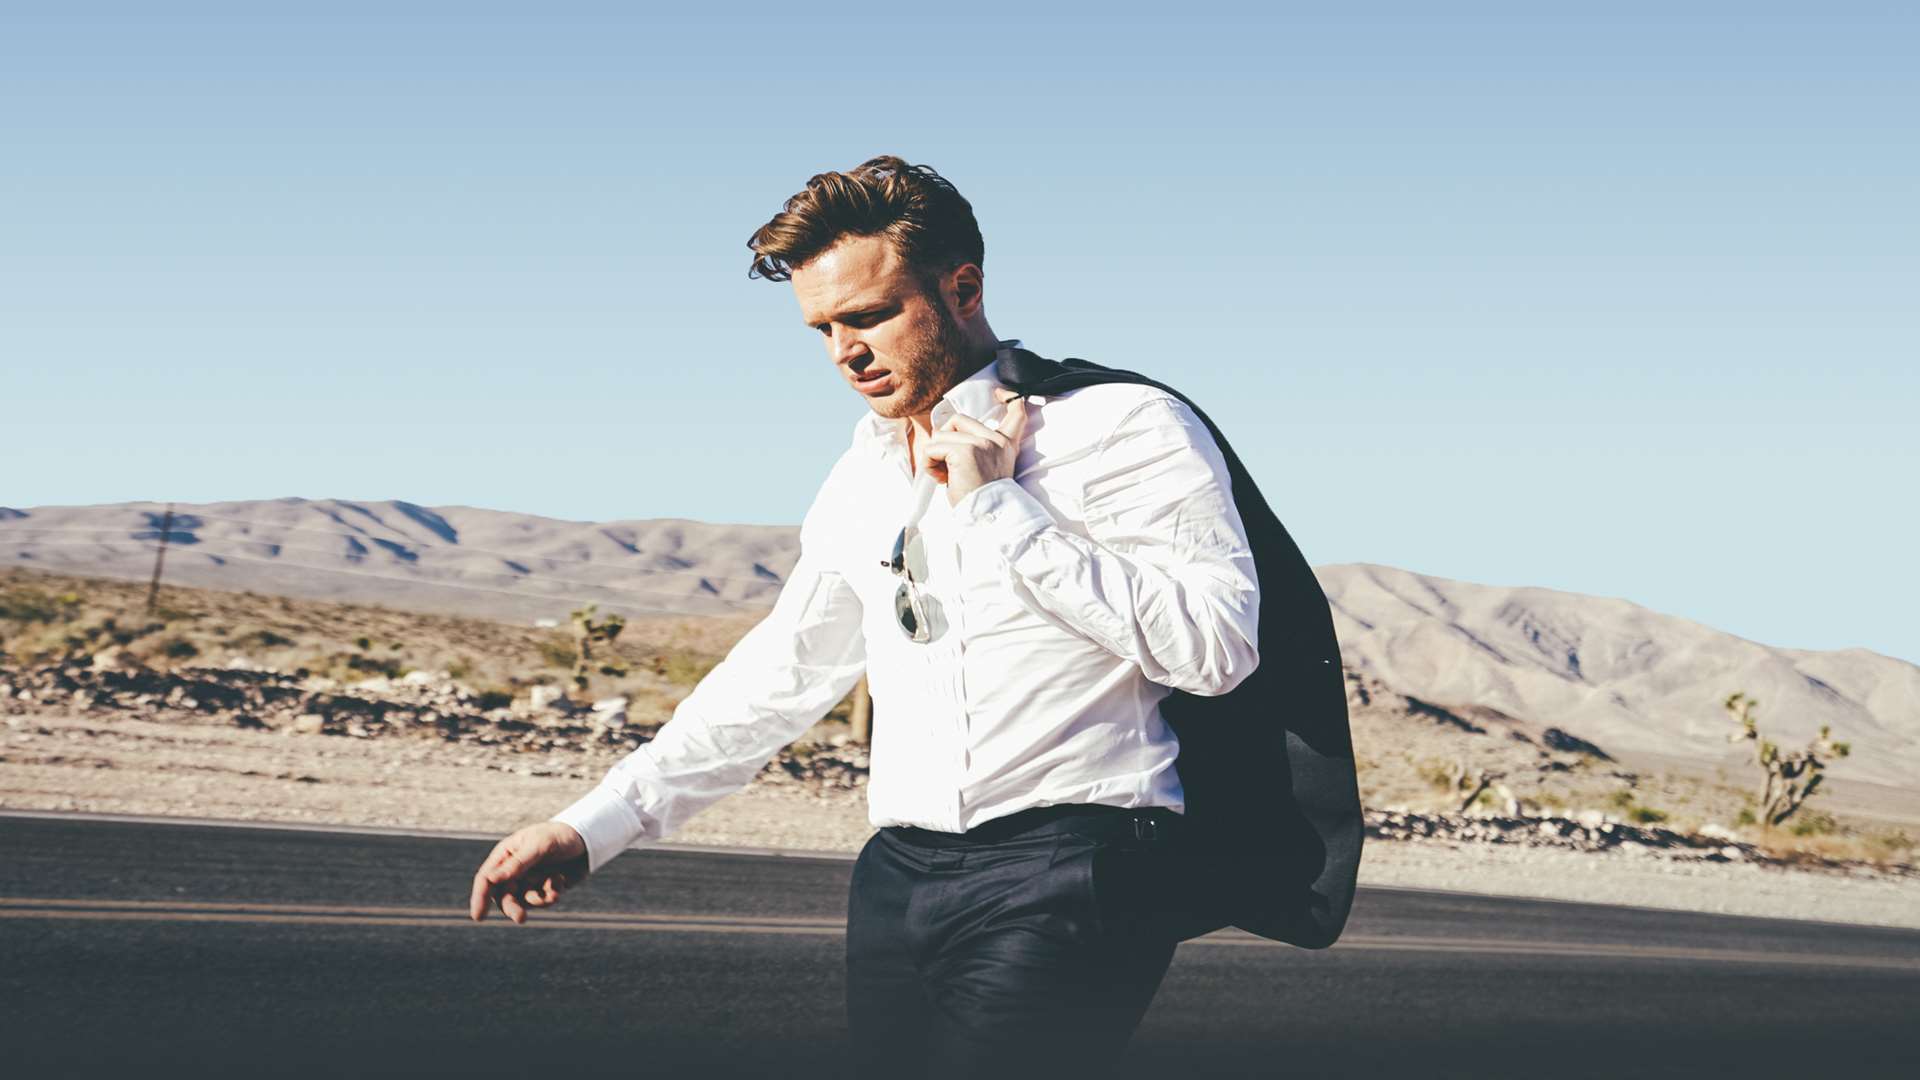 Olly Murs will bring his tour to Canterbury